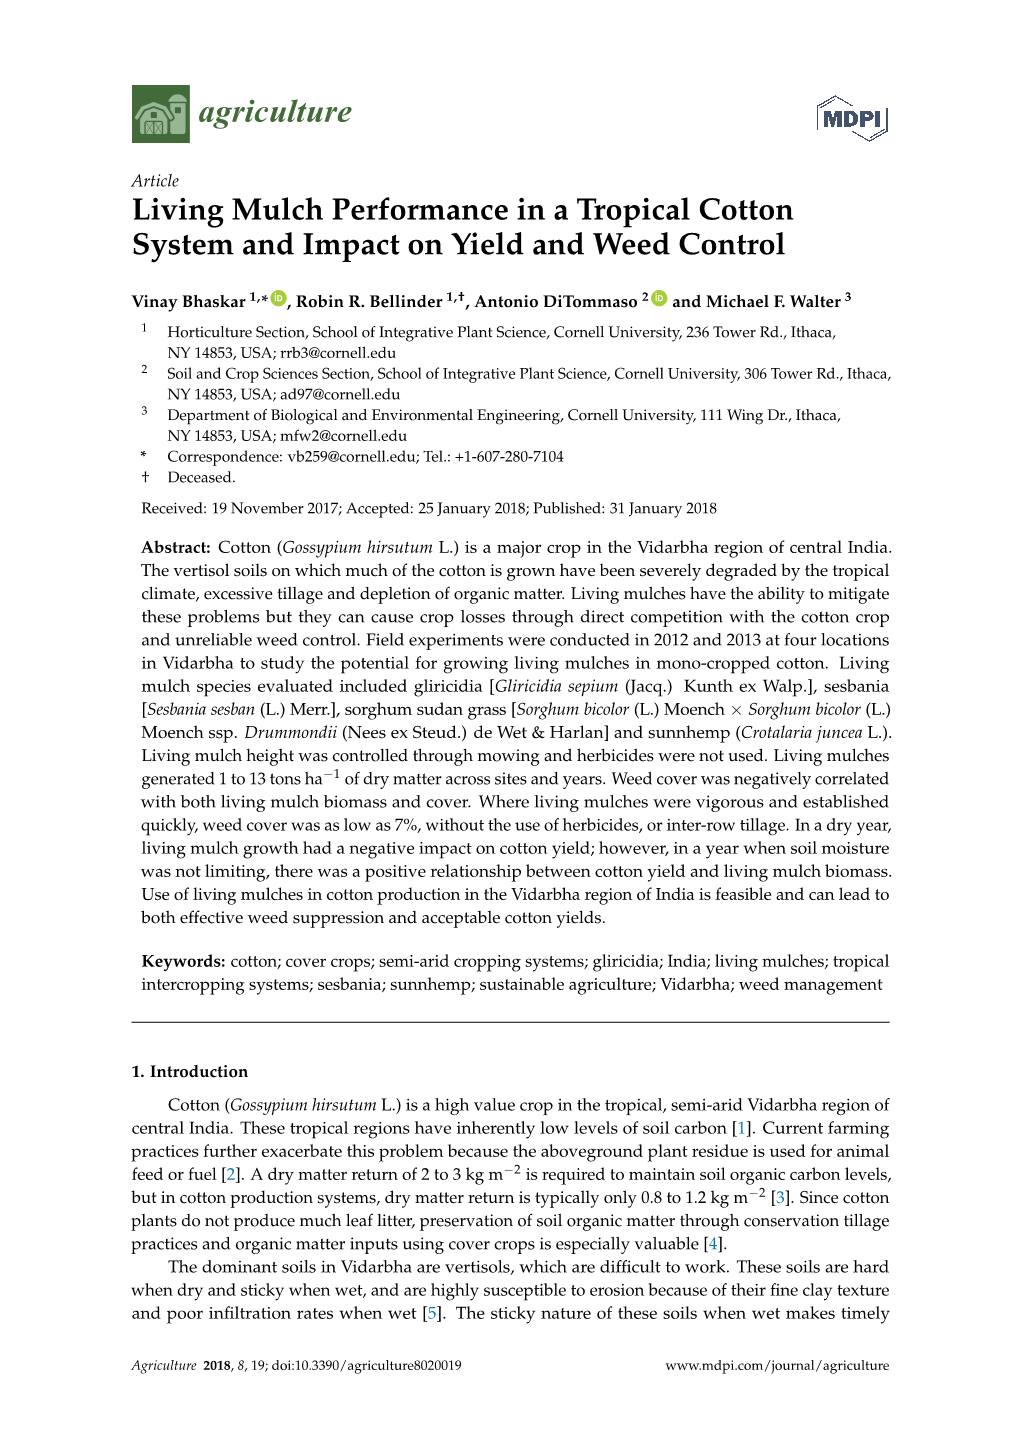 Living Mulch Performance in a Tropical Cotton System and Impact on Yield and Weed Control